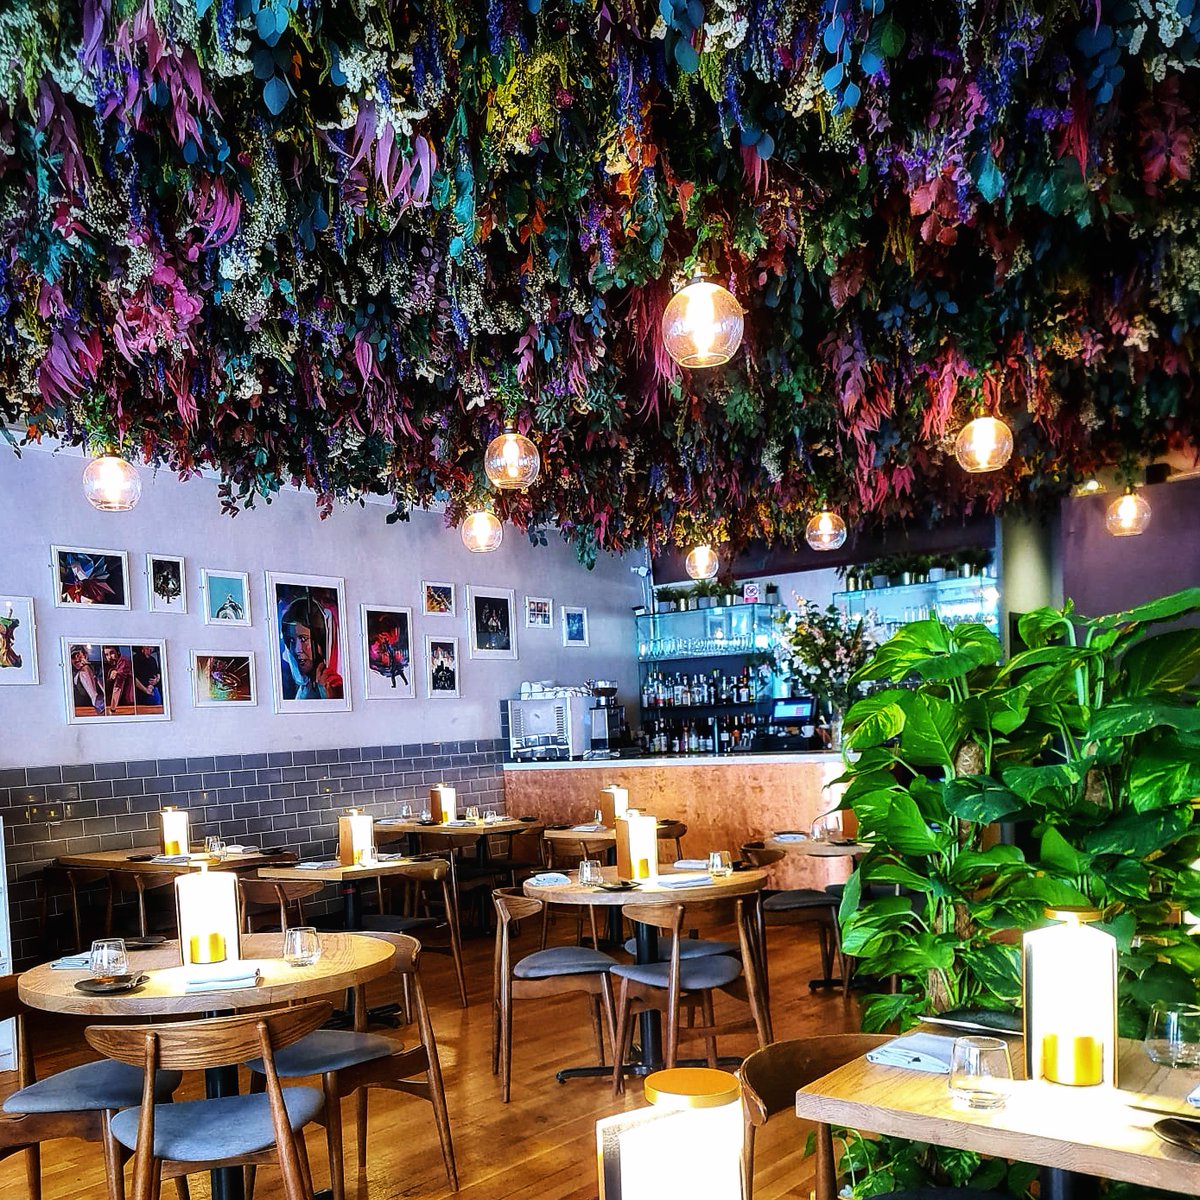 Check out the floral ceiling installation created by the team at @CopperInk restaurant, made with florals supplied by us! linkedin.com/pulse/floral-c…
@TonyRoddUK #floralceiling #driedflowers #preservedfoliage #restaurantdecor #grandreopening #floralinstallation #b2bwholesale